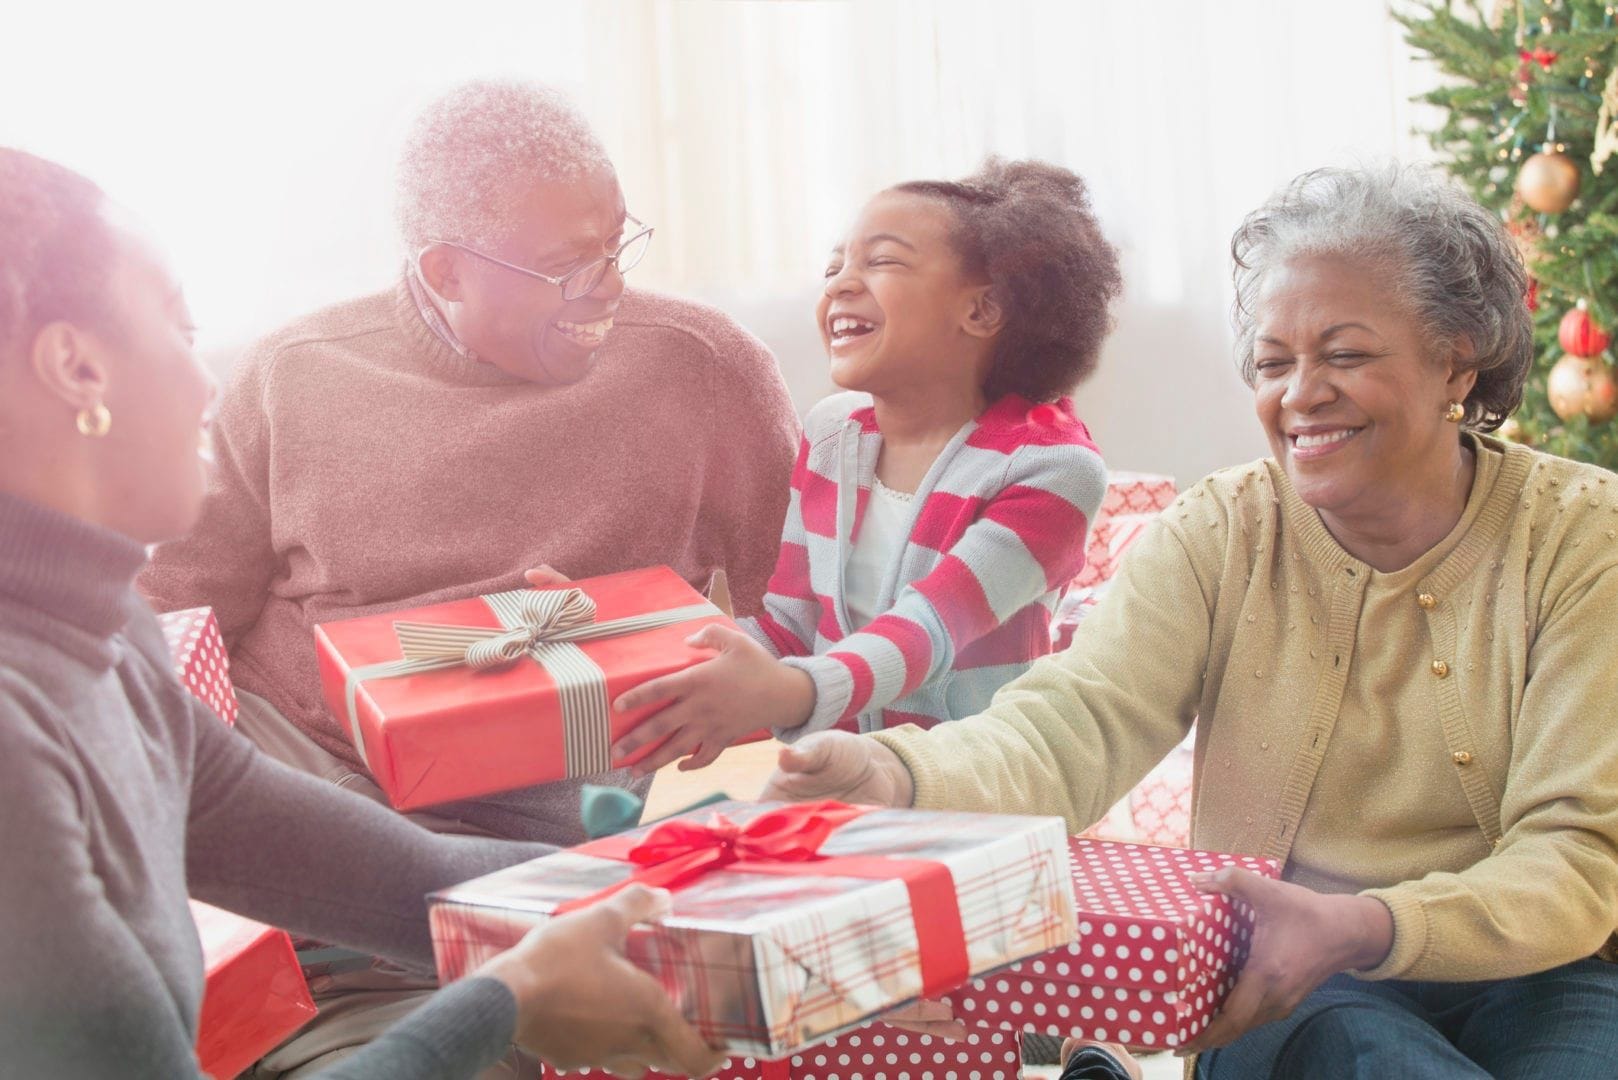 How to support older family members during the holidays